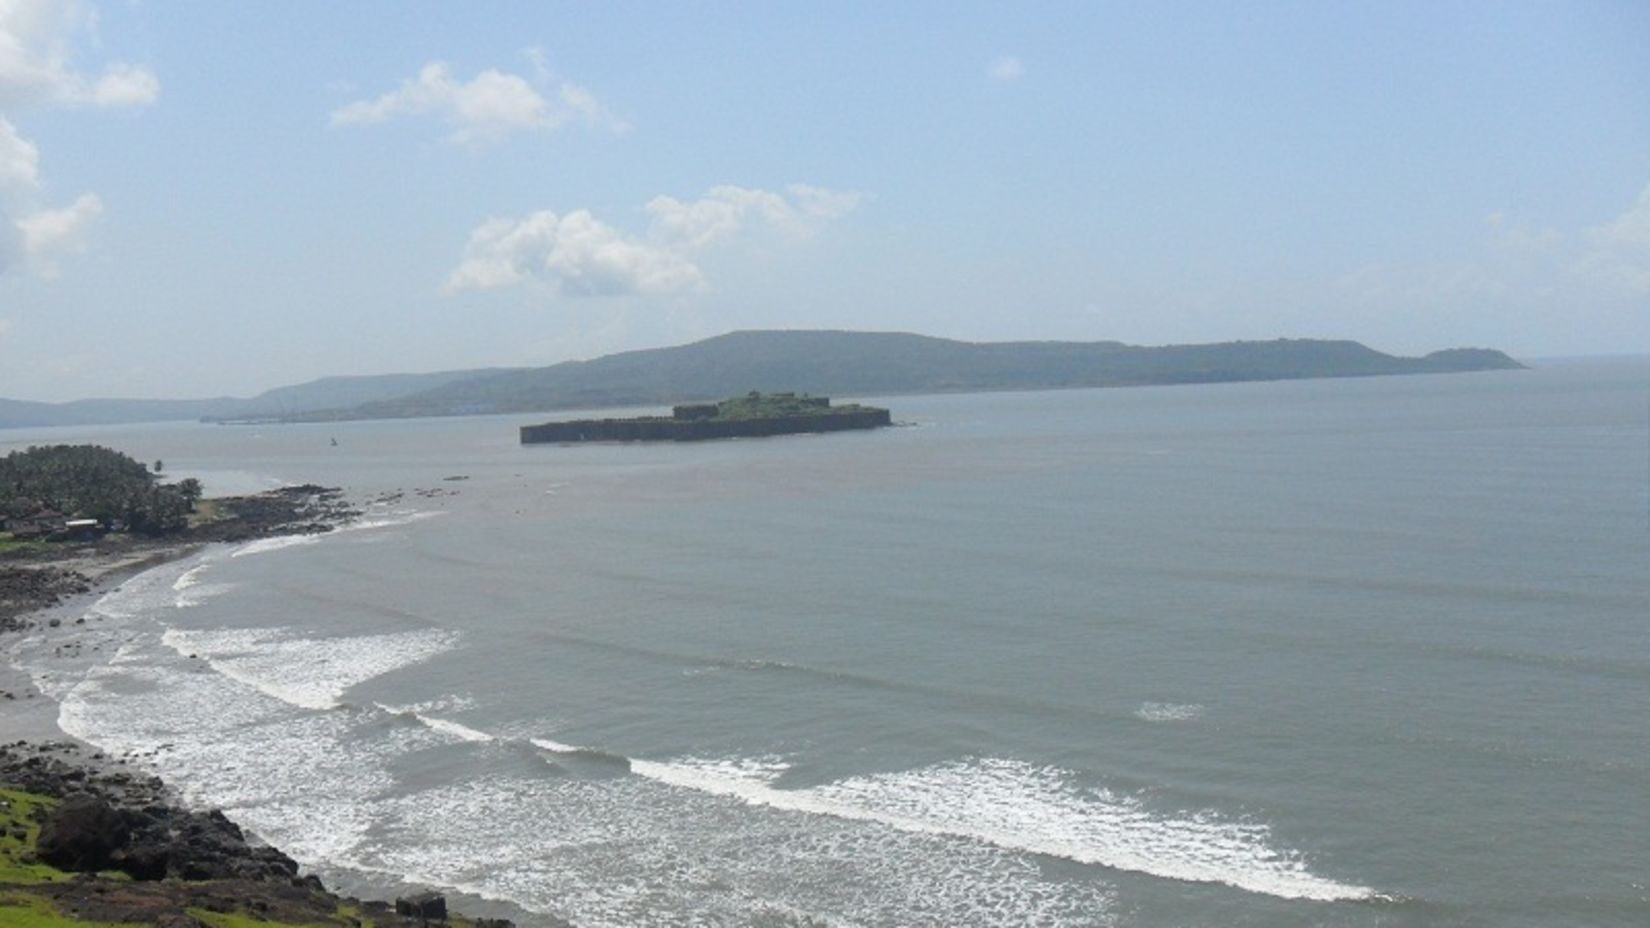 A scenic view of the Murud beach with greenery on one side